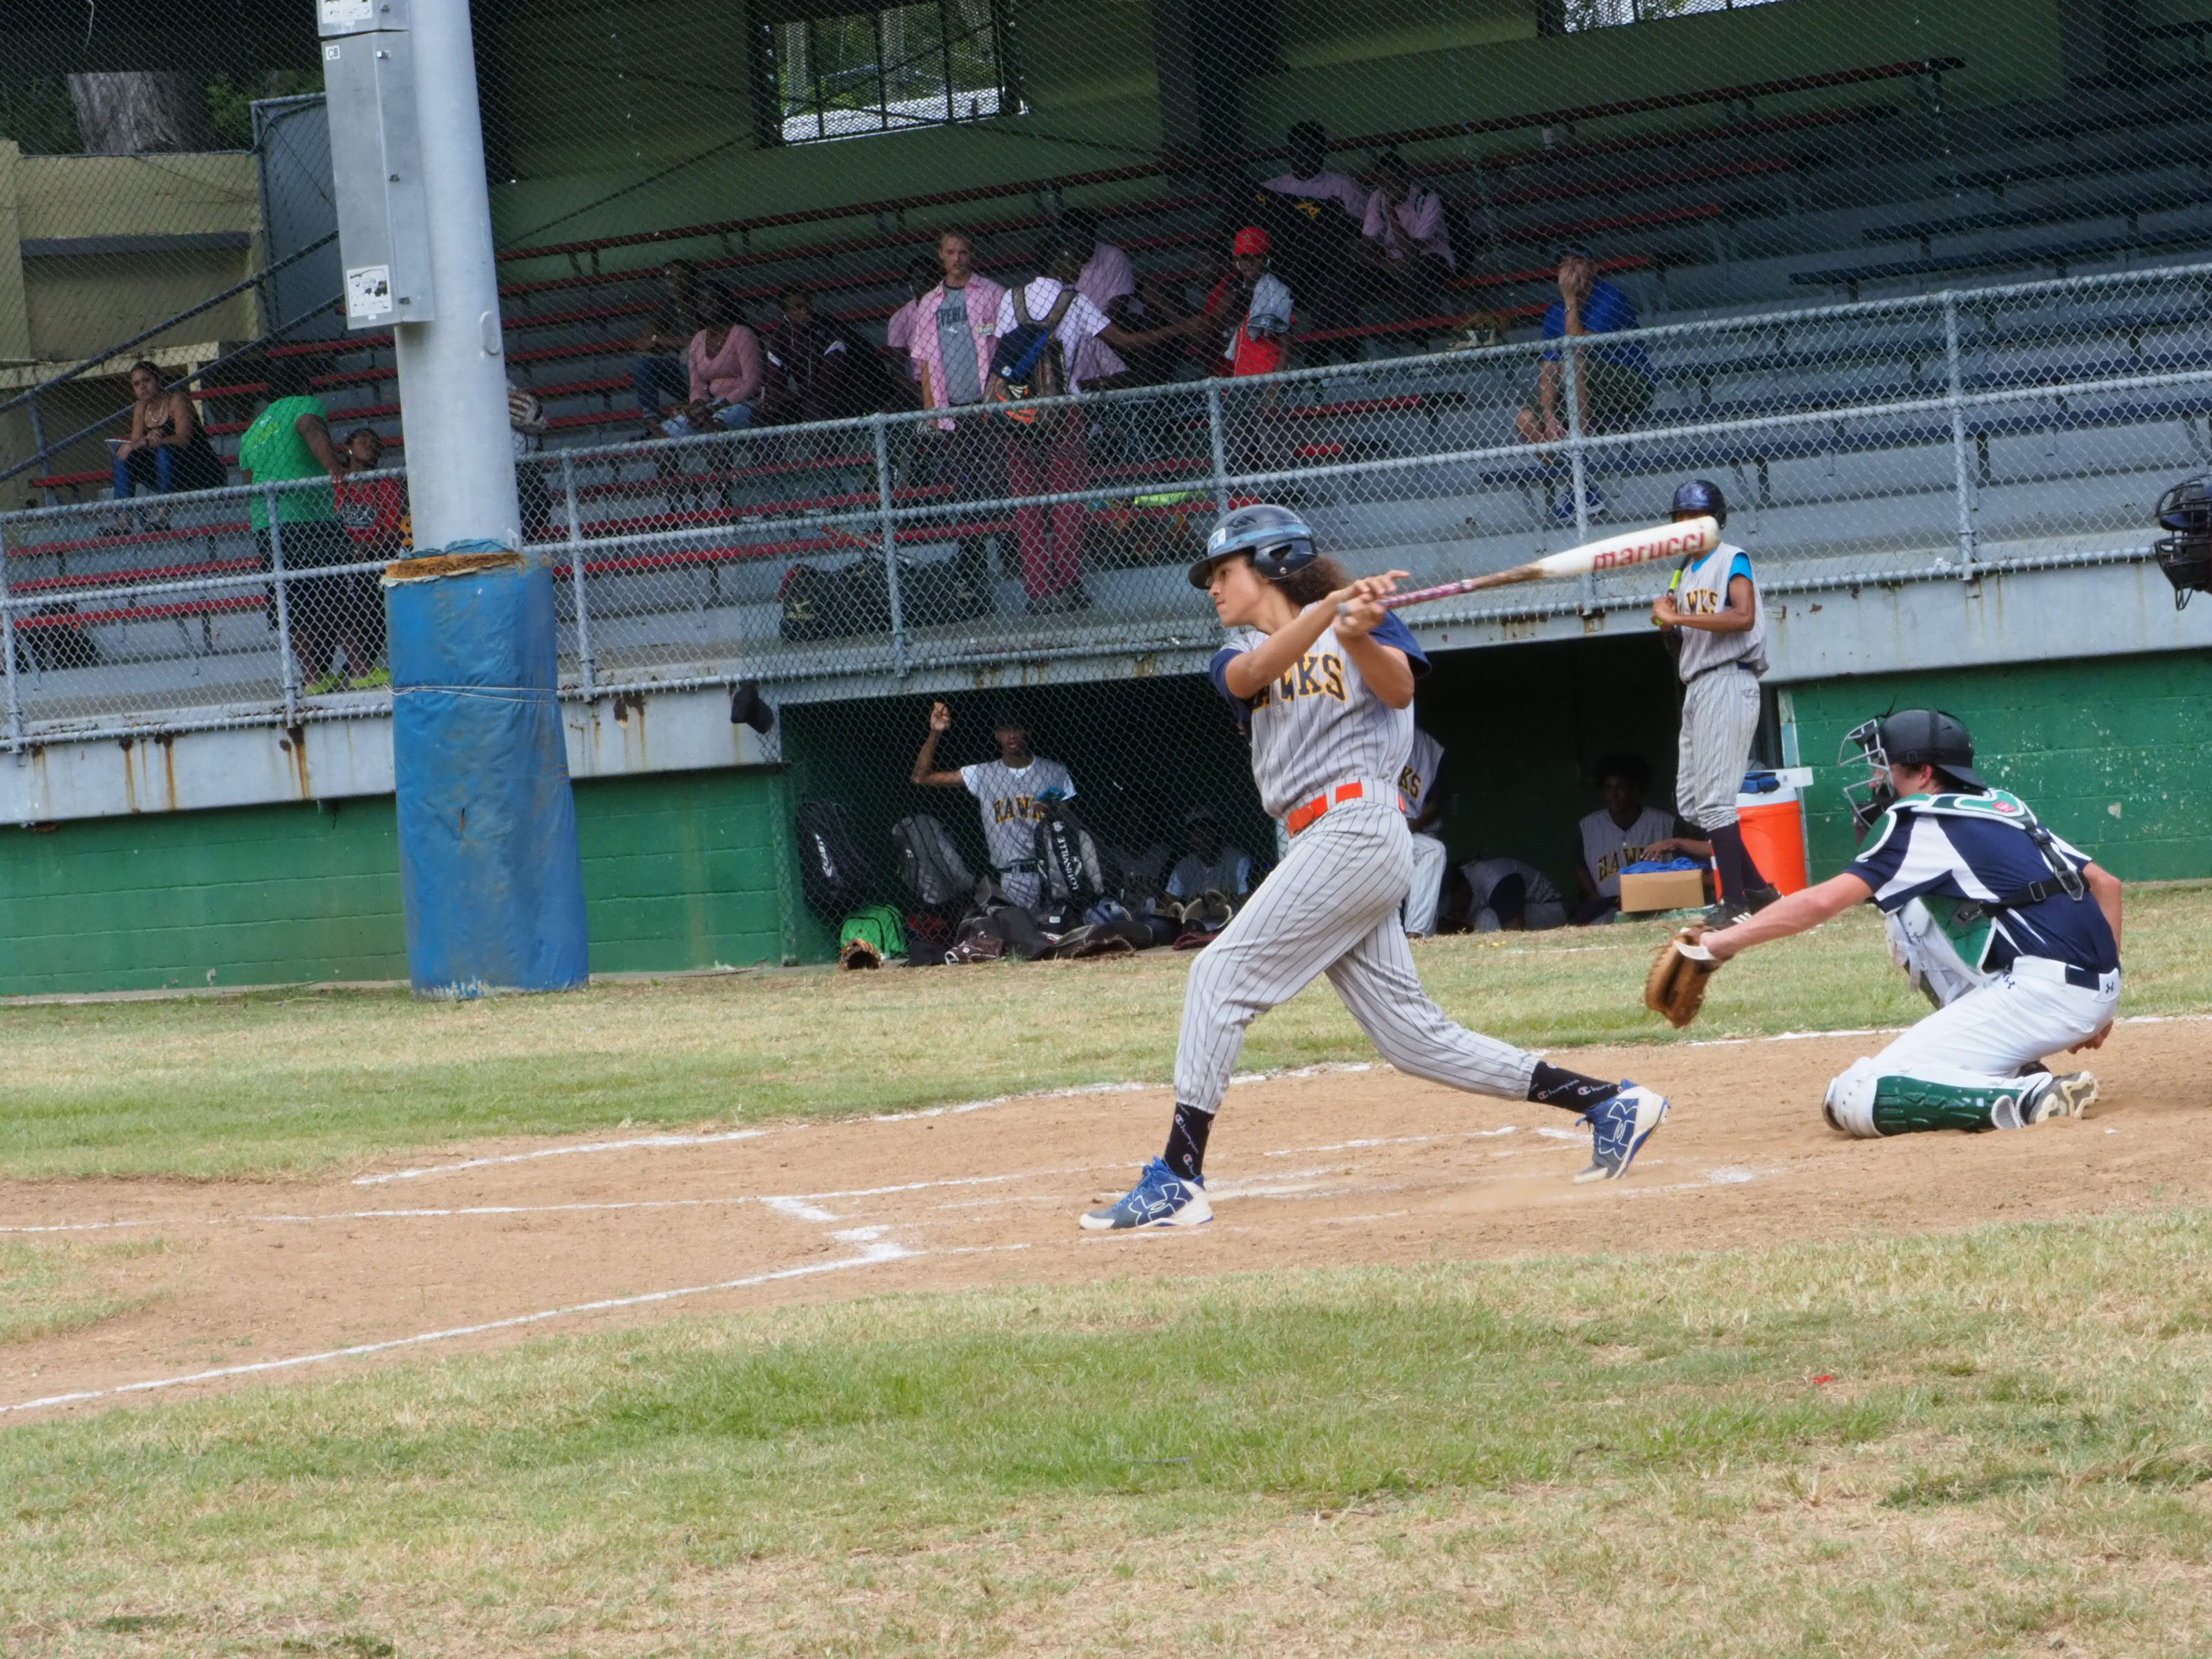 the Hawks take a swing at the Team Avenue Baseball's pitch.jpg